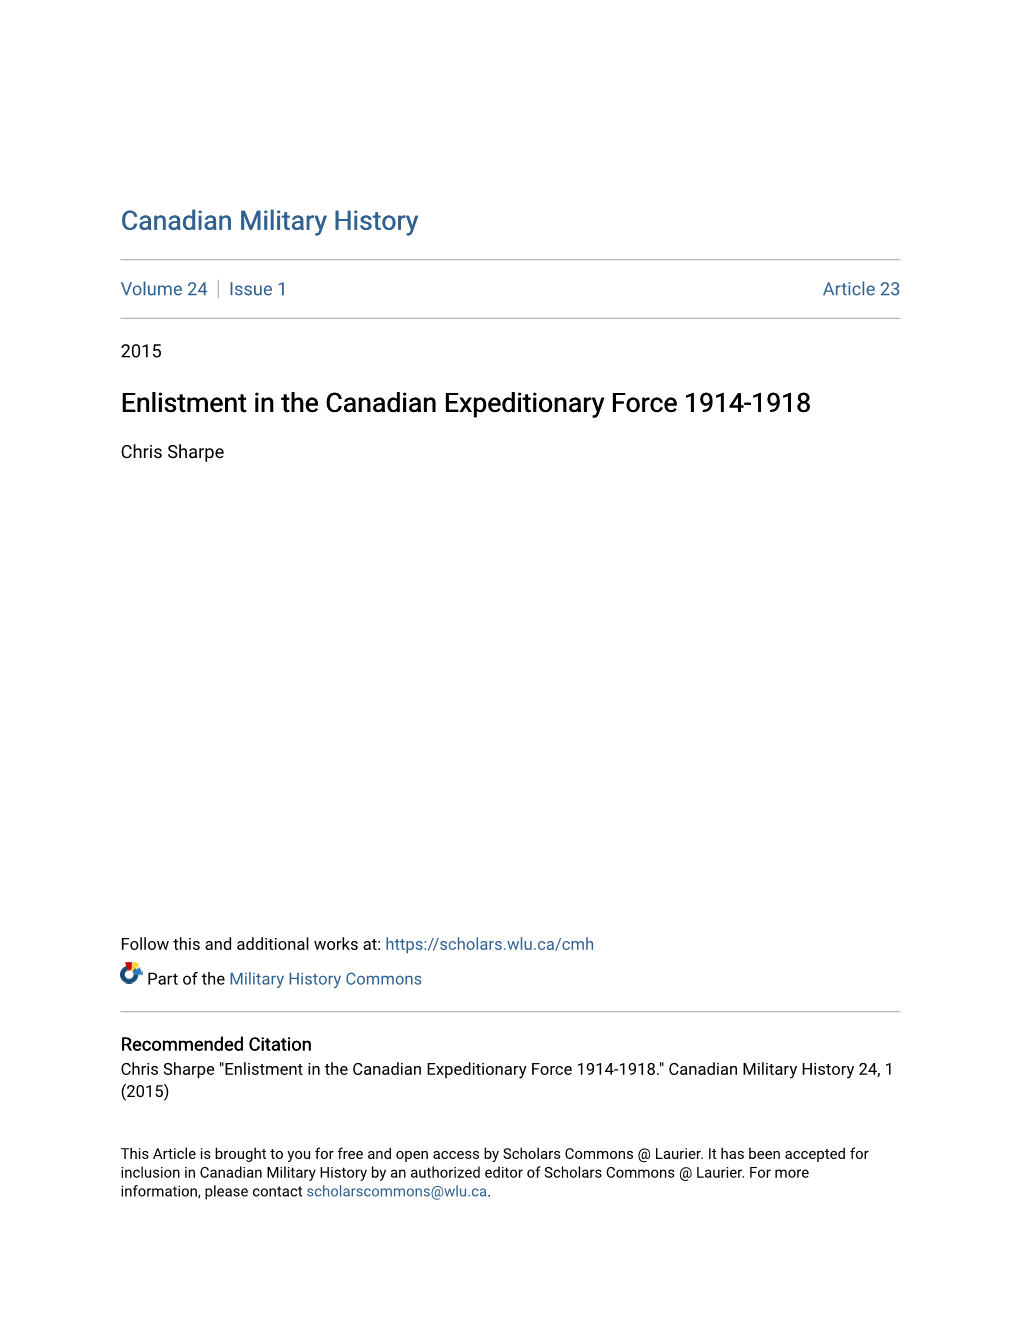 Enlistment in the Canadian Expeditionary Force 1914-1918